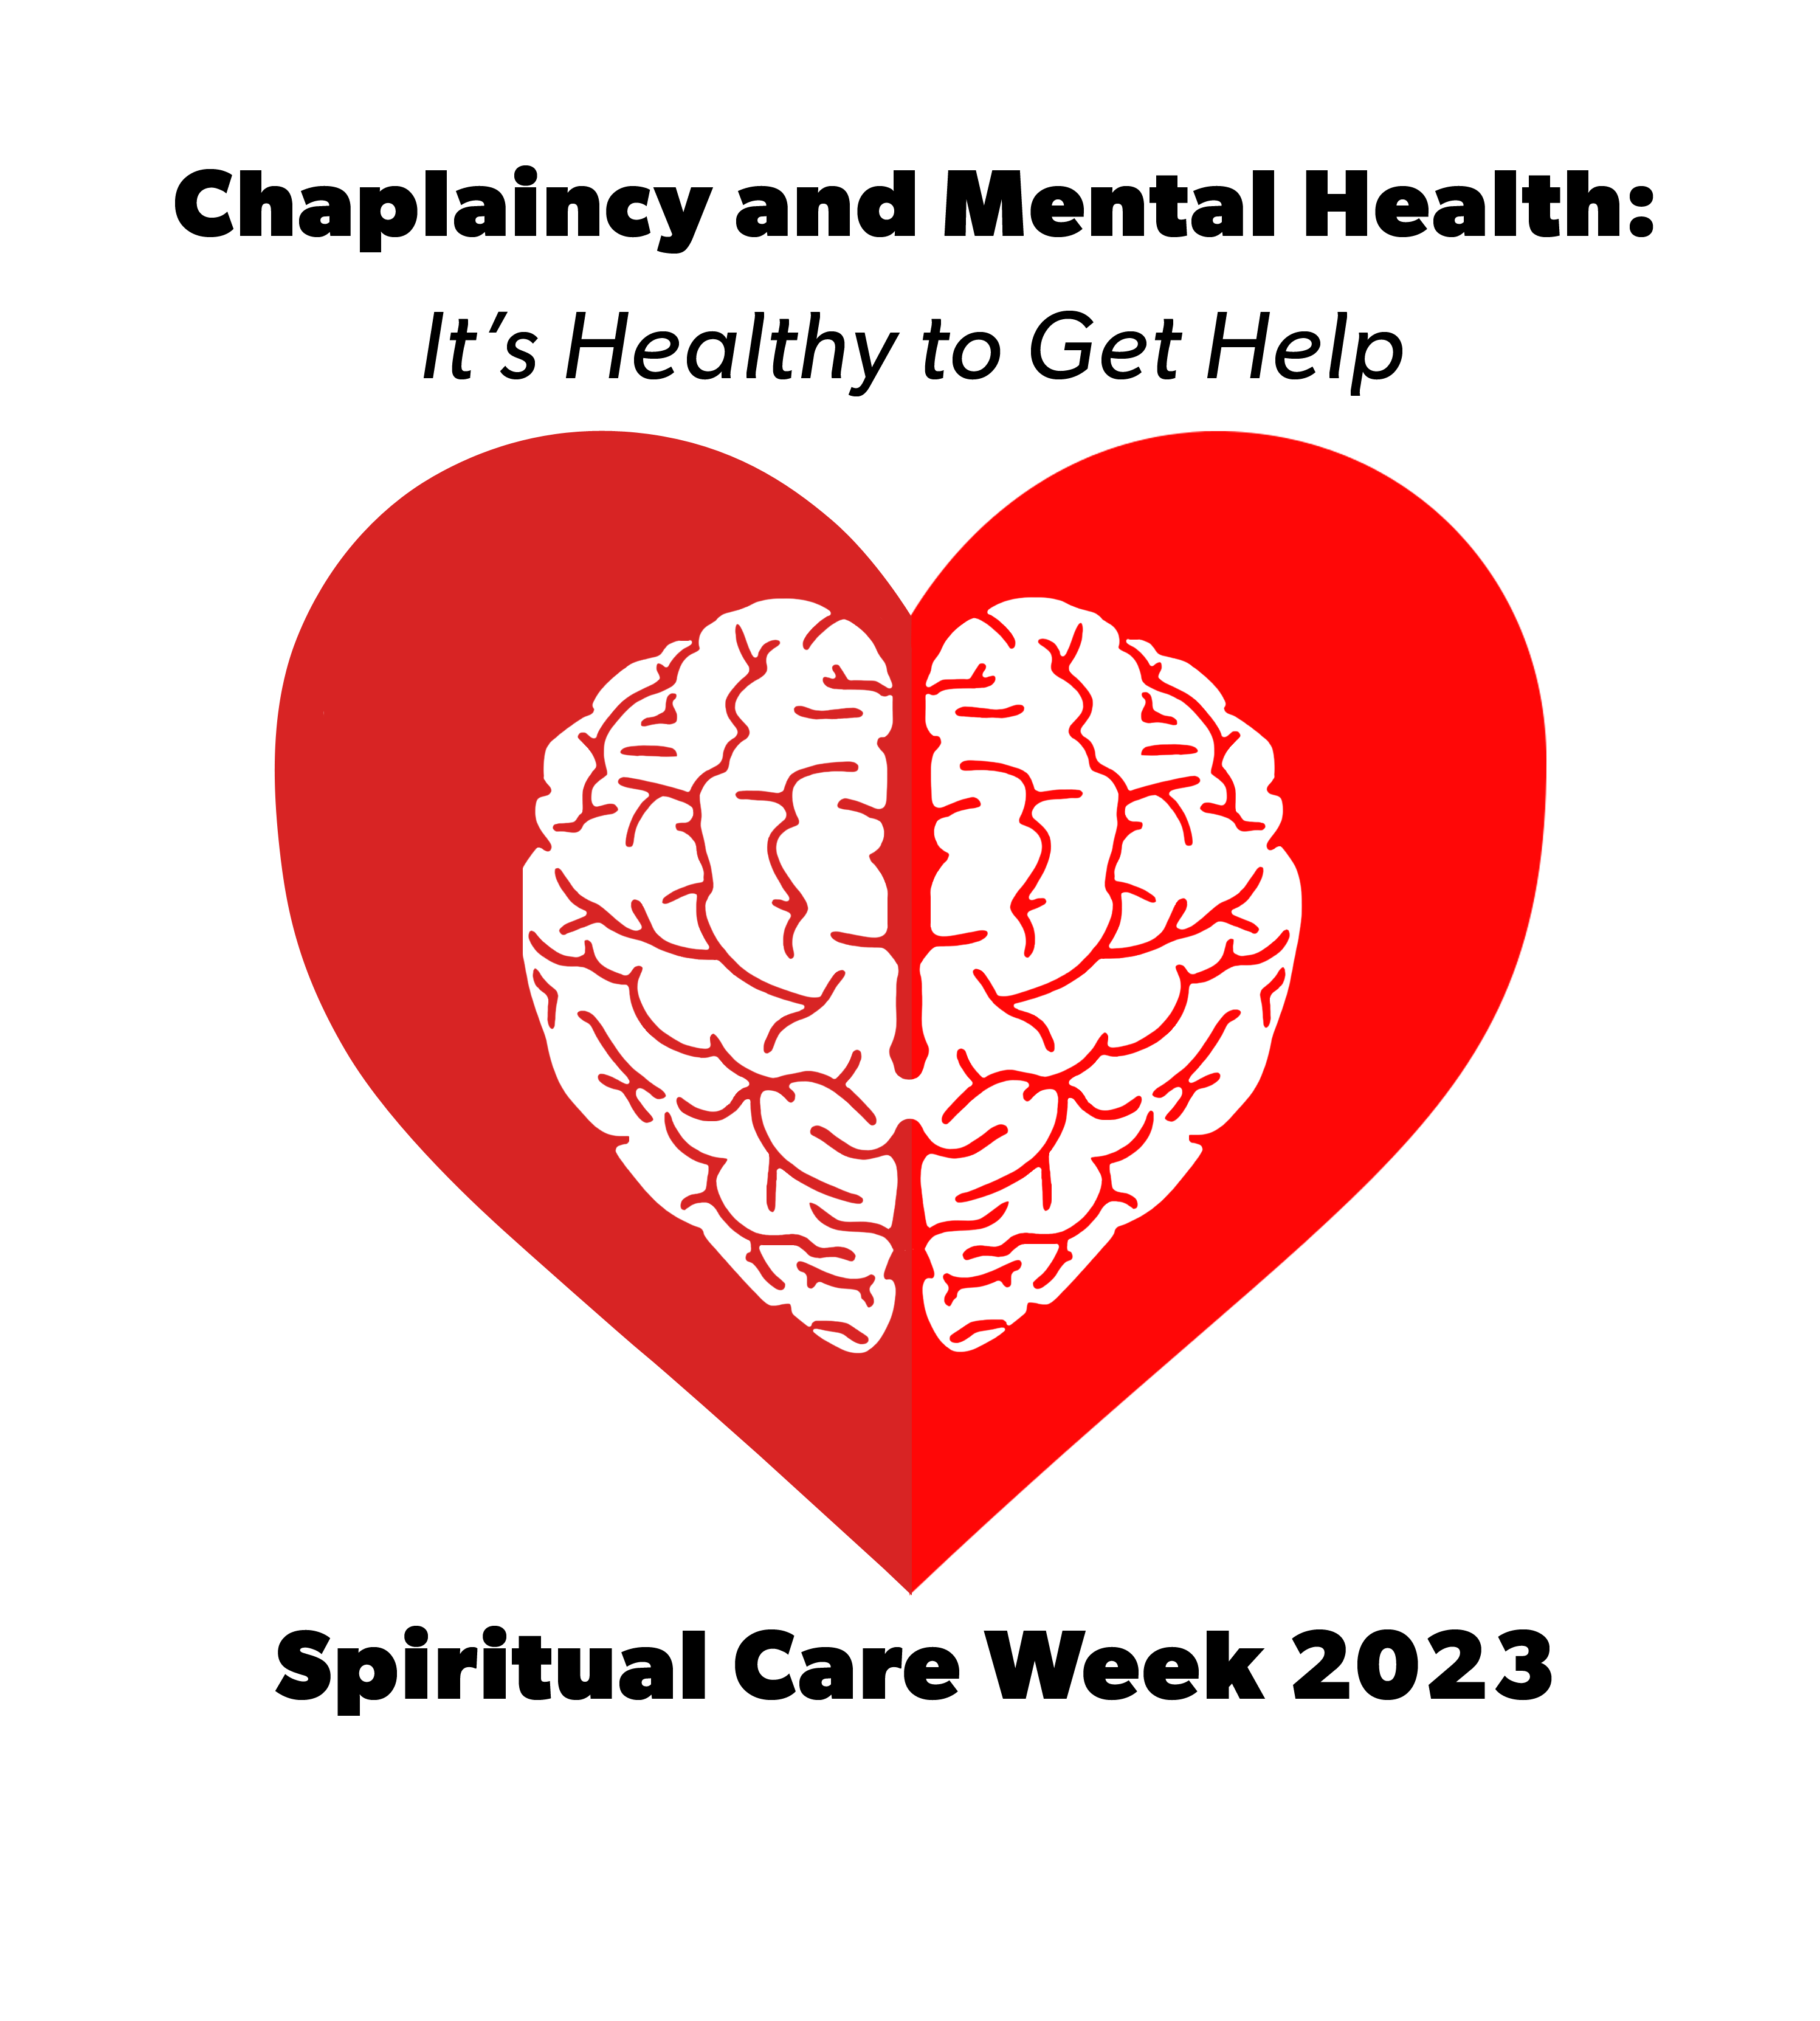 Chaplaincy and Mental Health: Its Healthy to Get Help Spiritual Care Week 2023